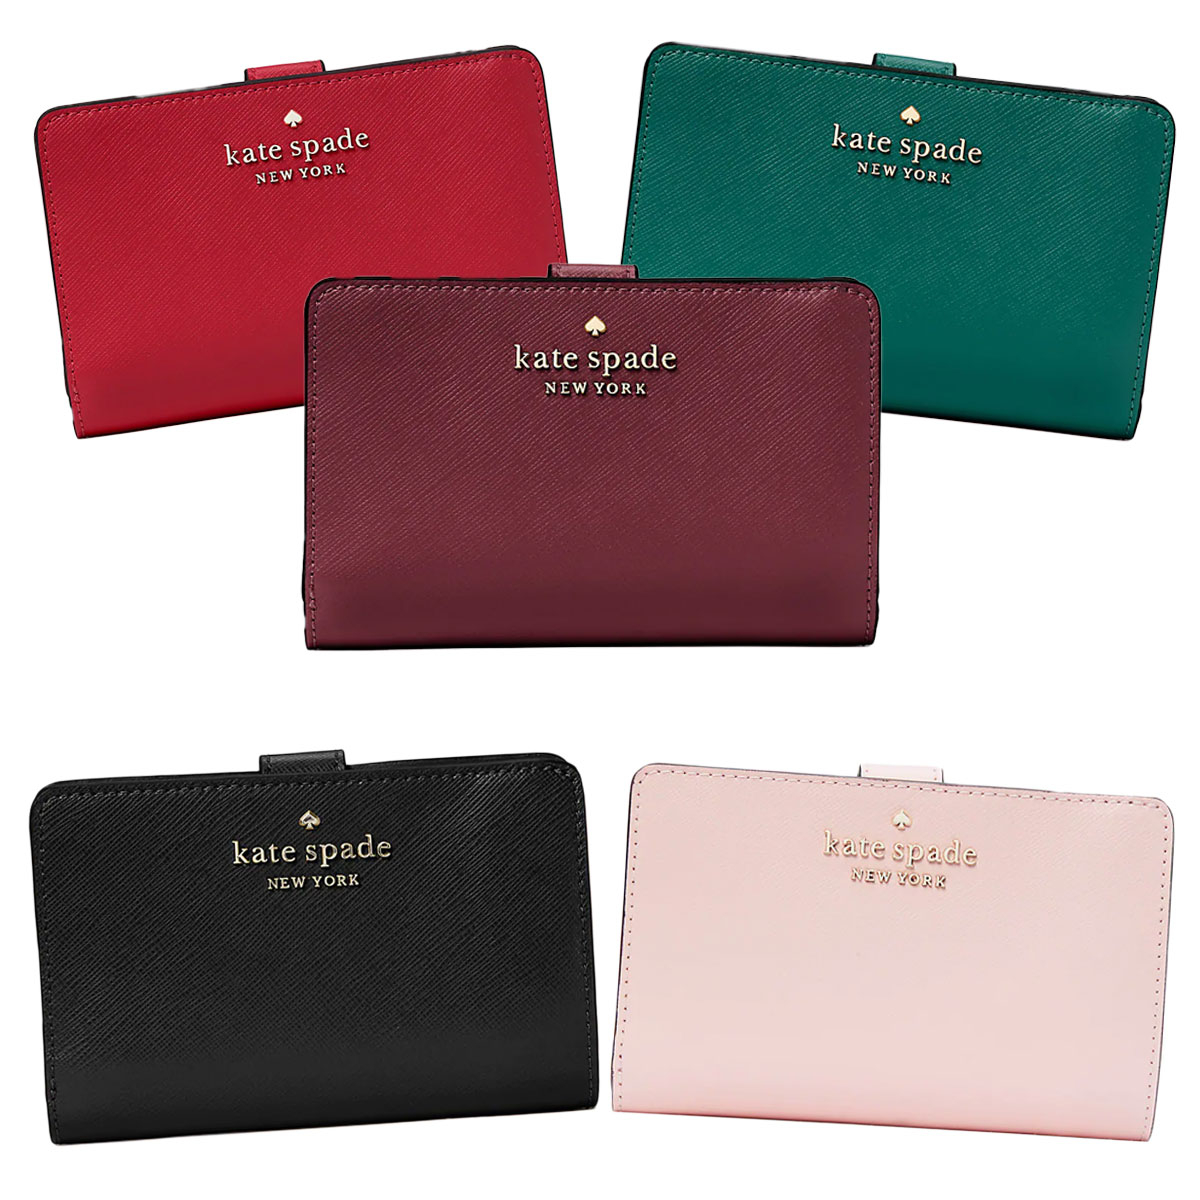 Kate Spade 24-Hour Flash Deal: Get a $189 Wallet for Just $45 - E! Online